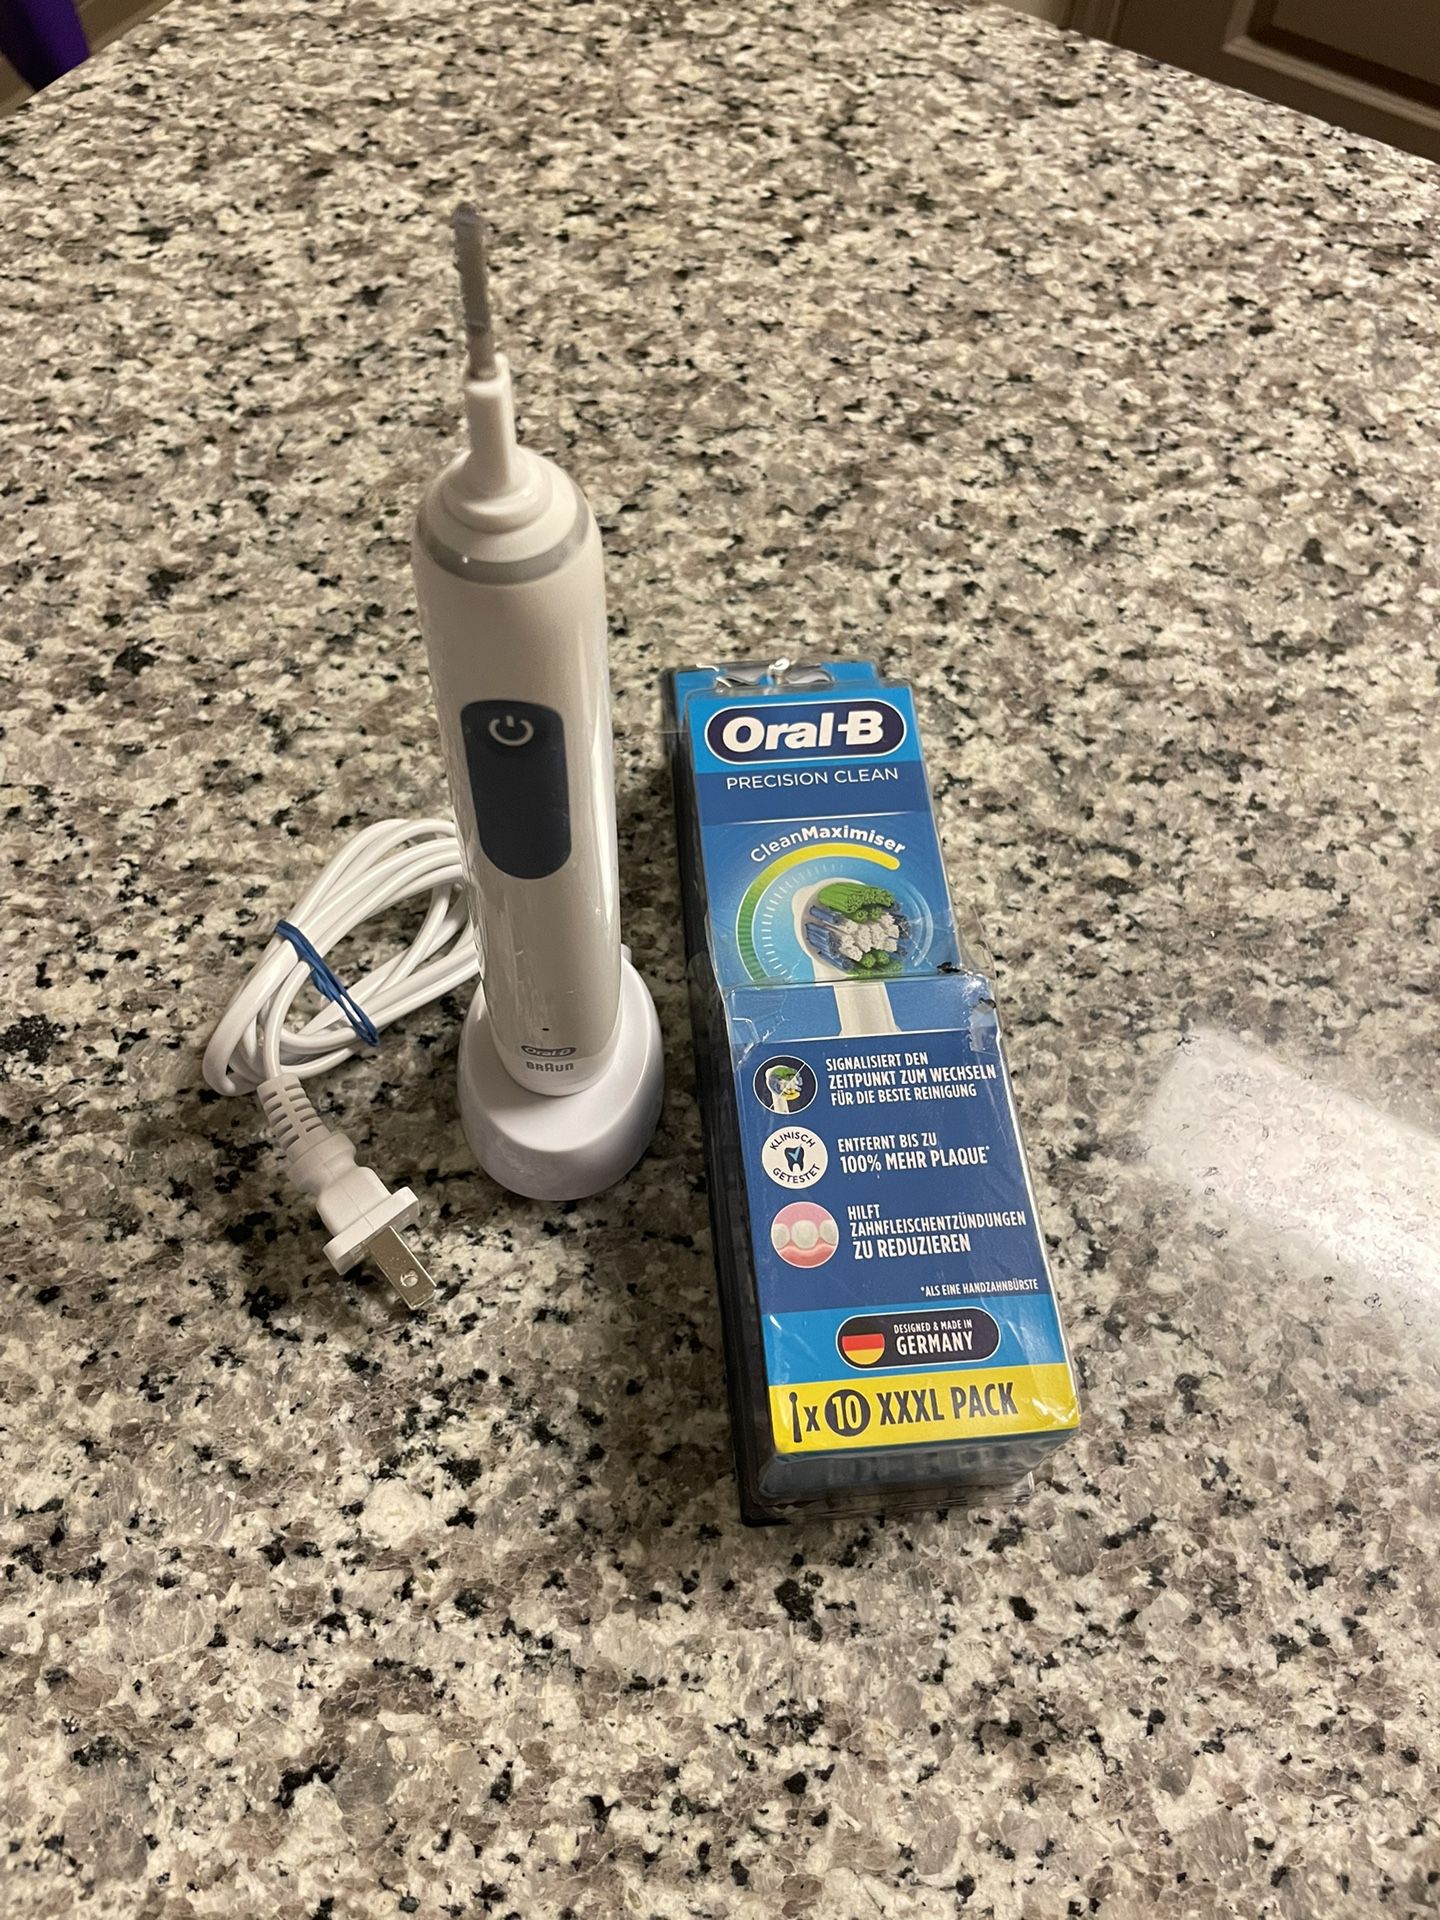 Oral-B electric toothbrush with charger plus a pack of 7 Precision Clean brush heads .